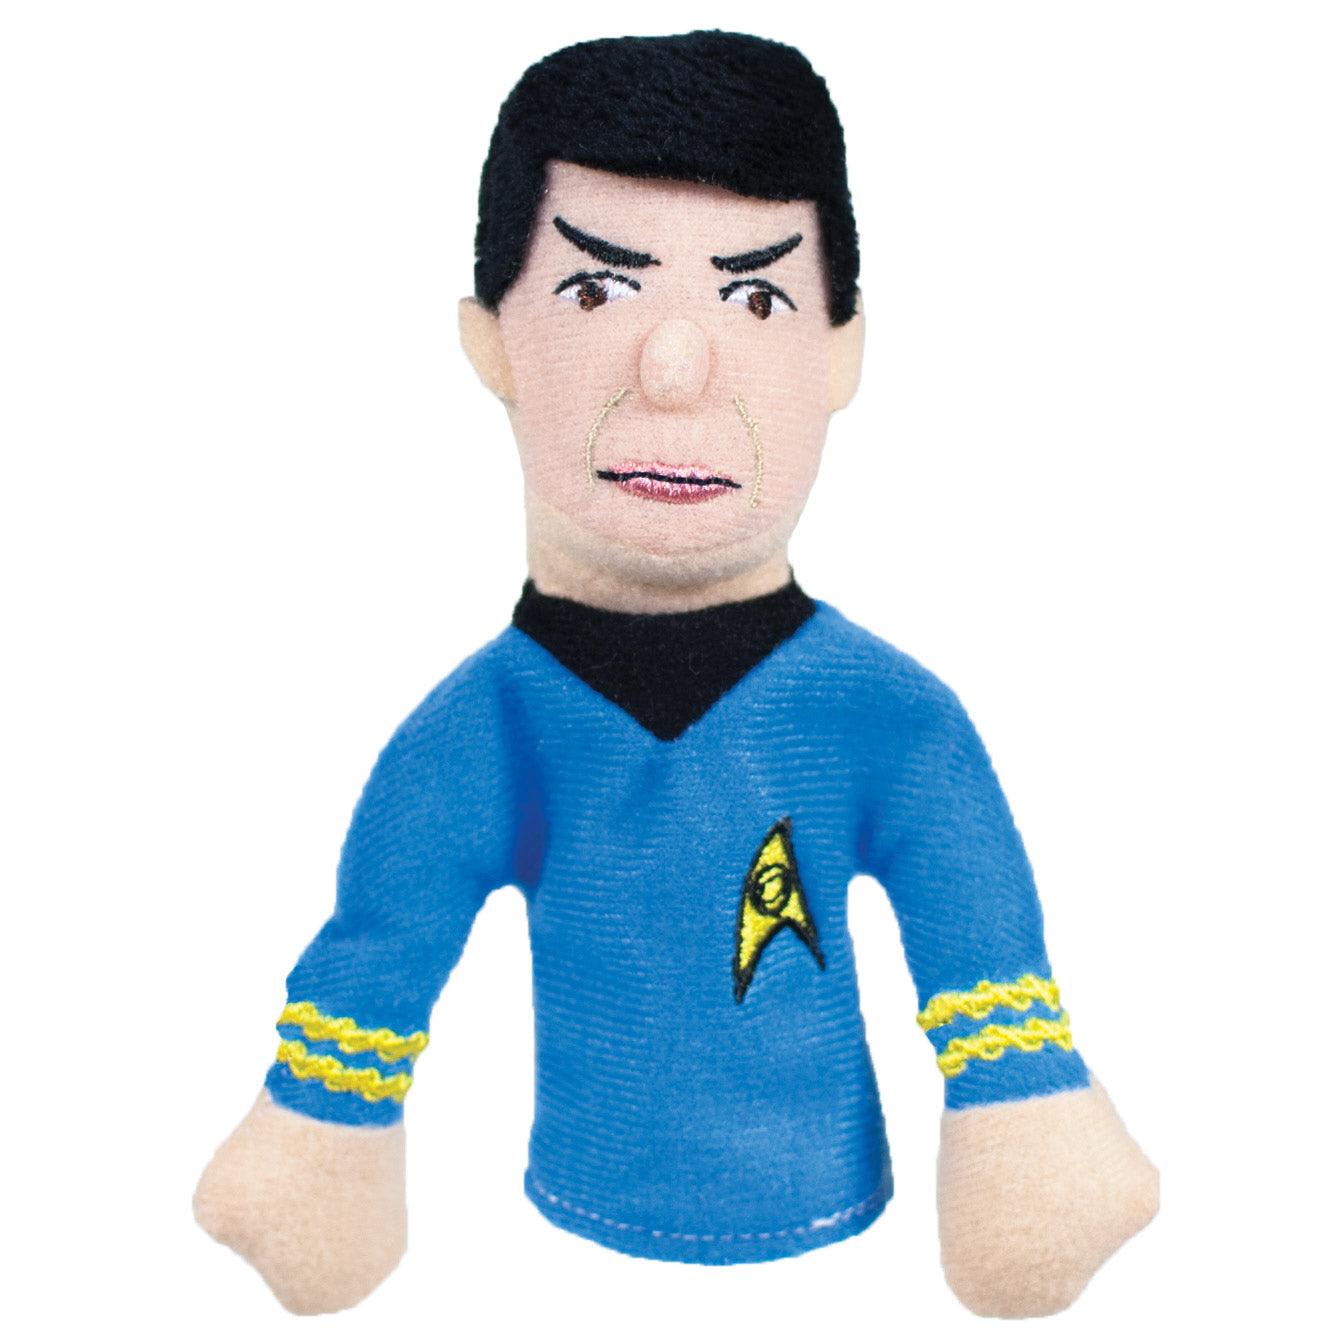 Product photo of Star Treck Spock Finger Puppet, a novelty gift manufactured by The Unemployed Philosophers Guild.